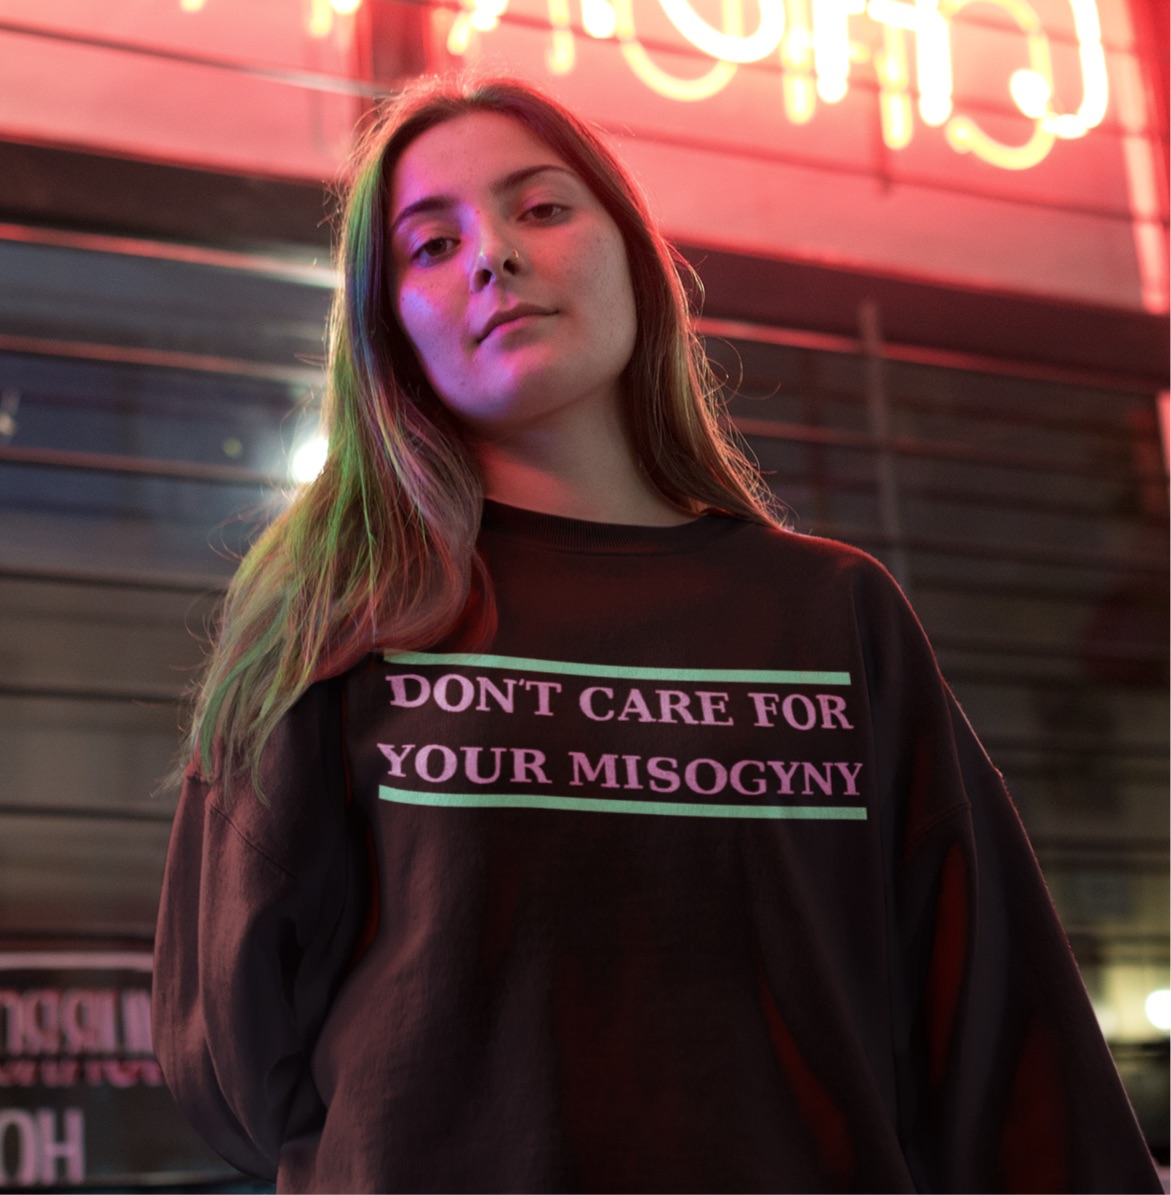 don't care for your misogyny sweatshirt, feminist sweatshirt, intersectional feminist sweatshirt - Shop Women’s Rights T-shirts